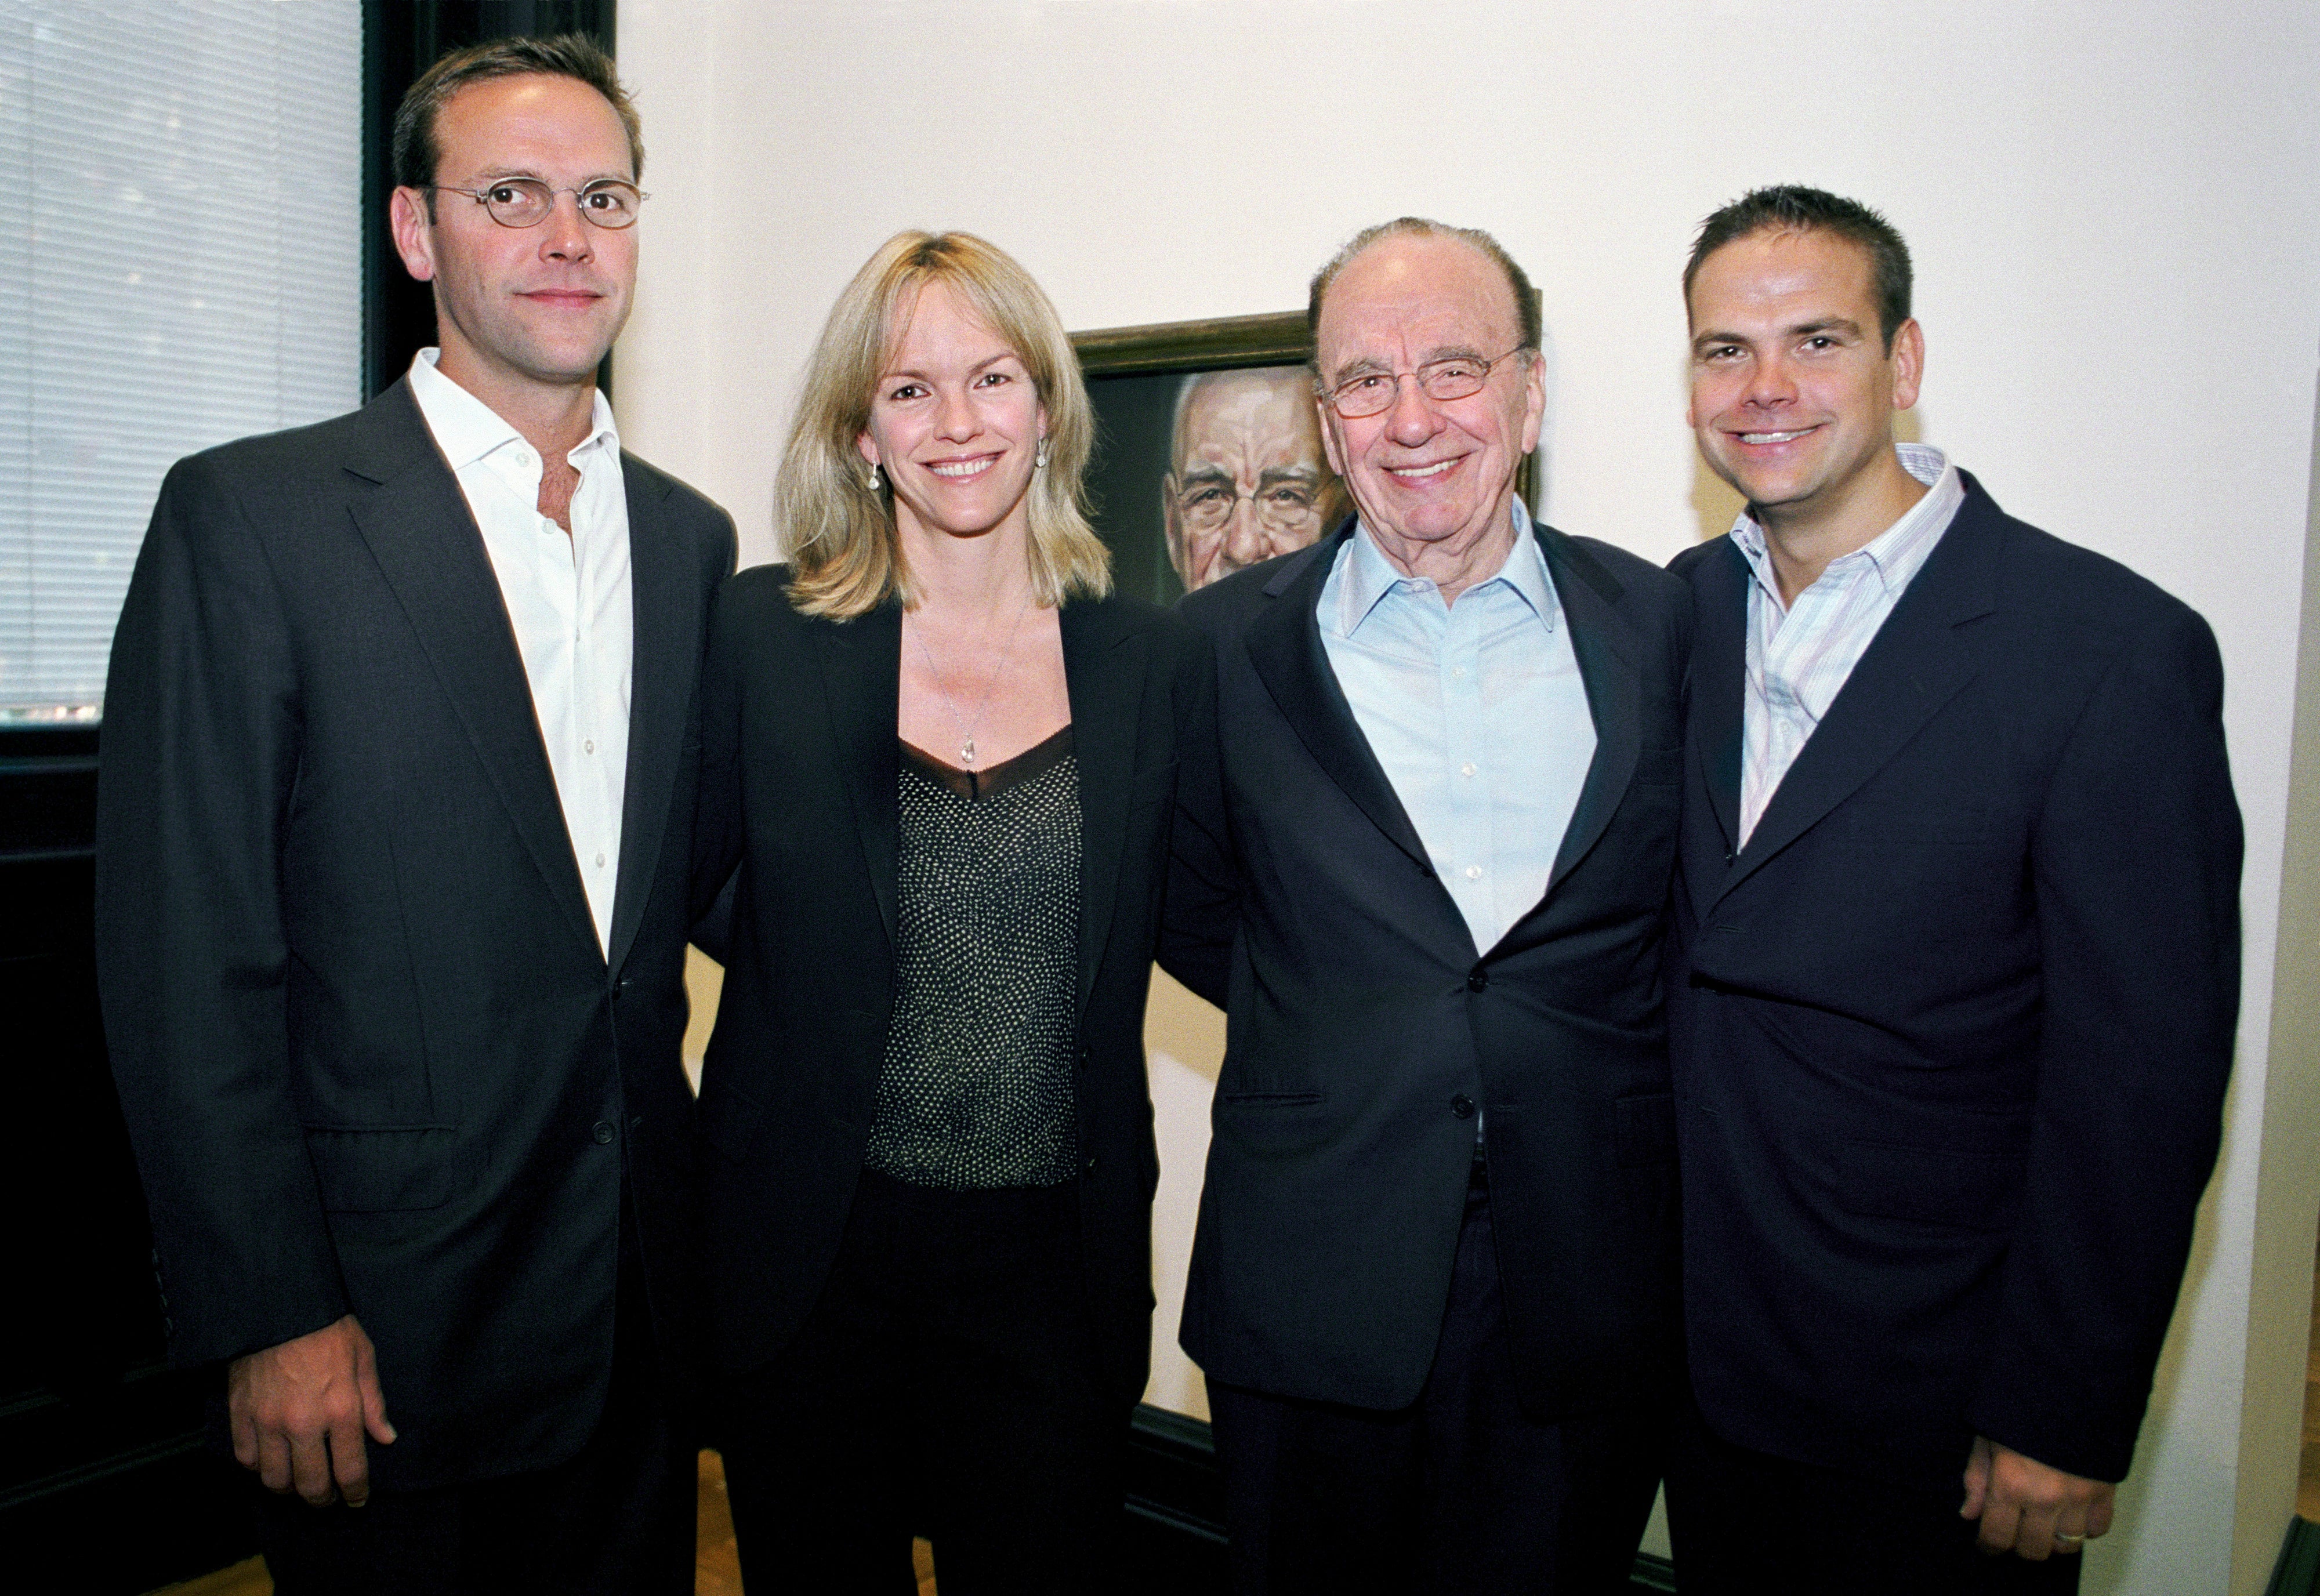 James Murdoch, with sister Elisabeth, father Rupert and brother Lachlan at the National Portrait Gallery in 2007